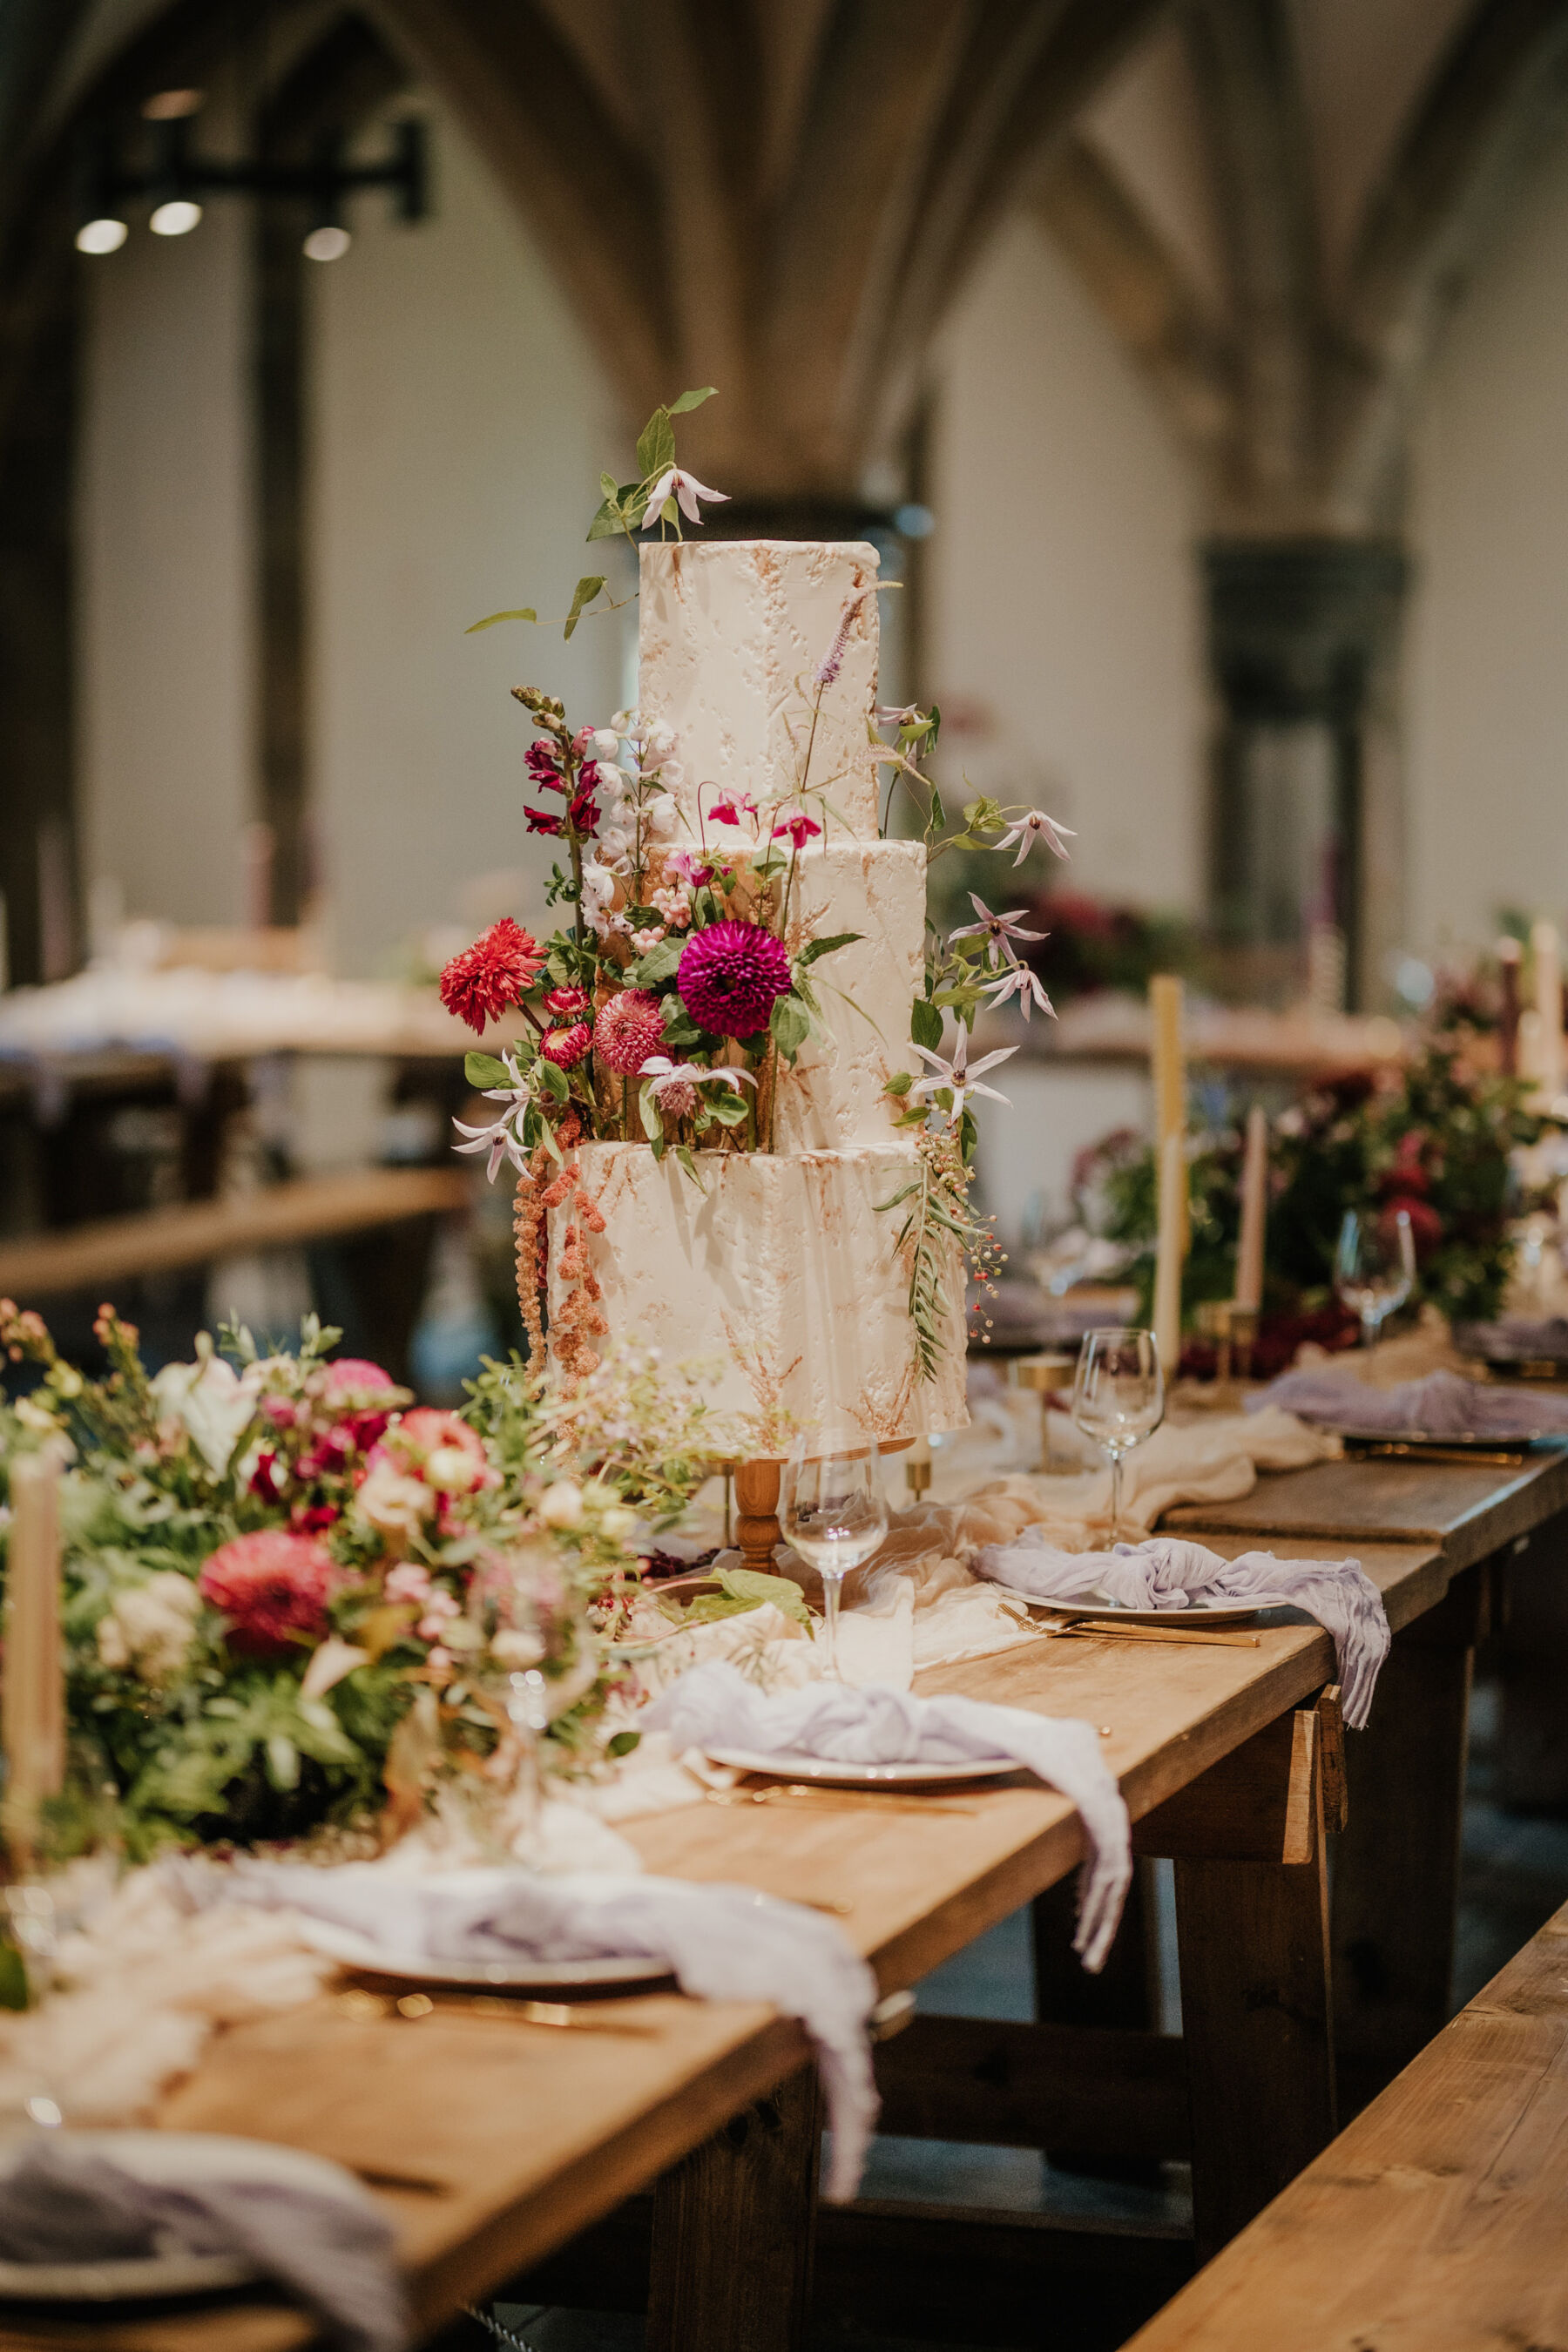 Romantic and magical wedding cake with summer flowers and greenery. Bishop's Palace historic wedding venue in Wells, Somerset.